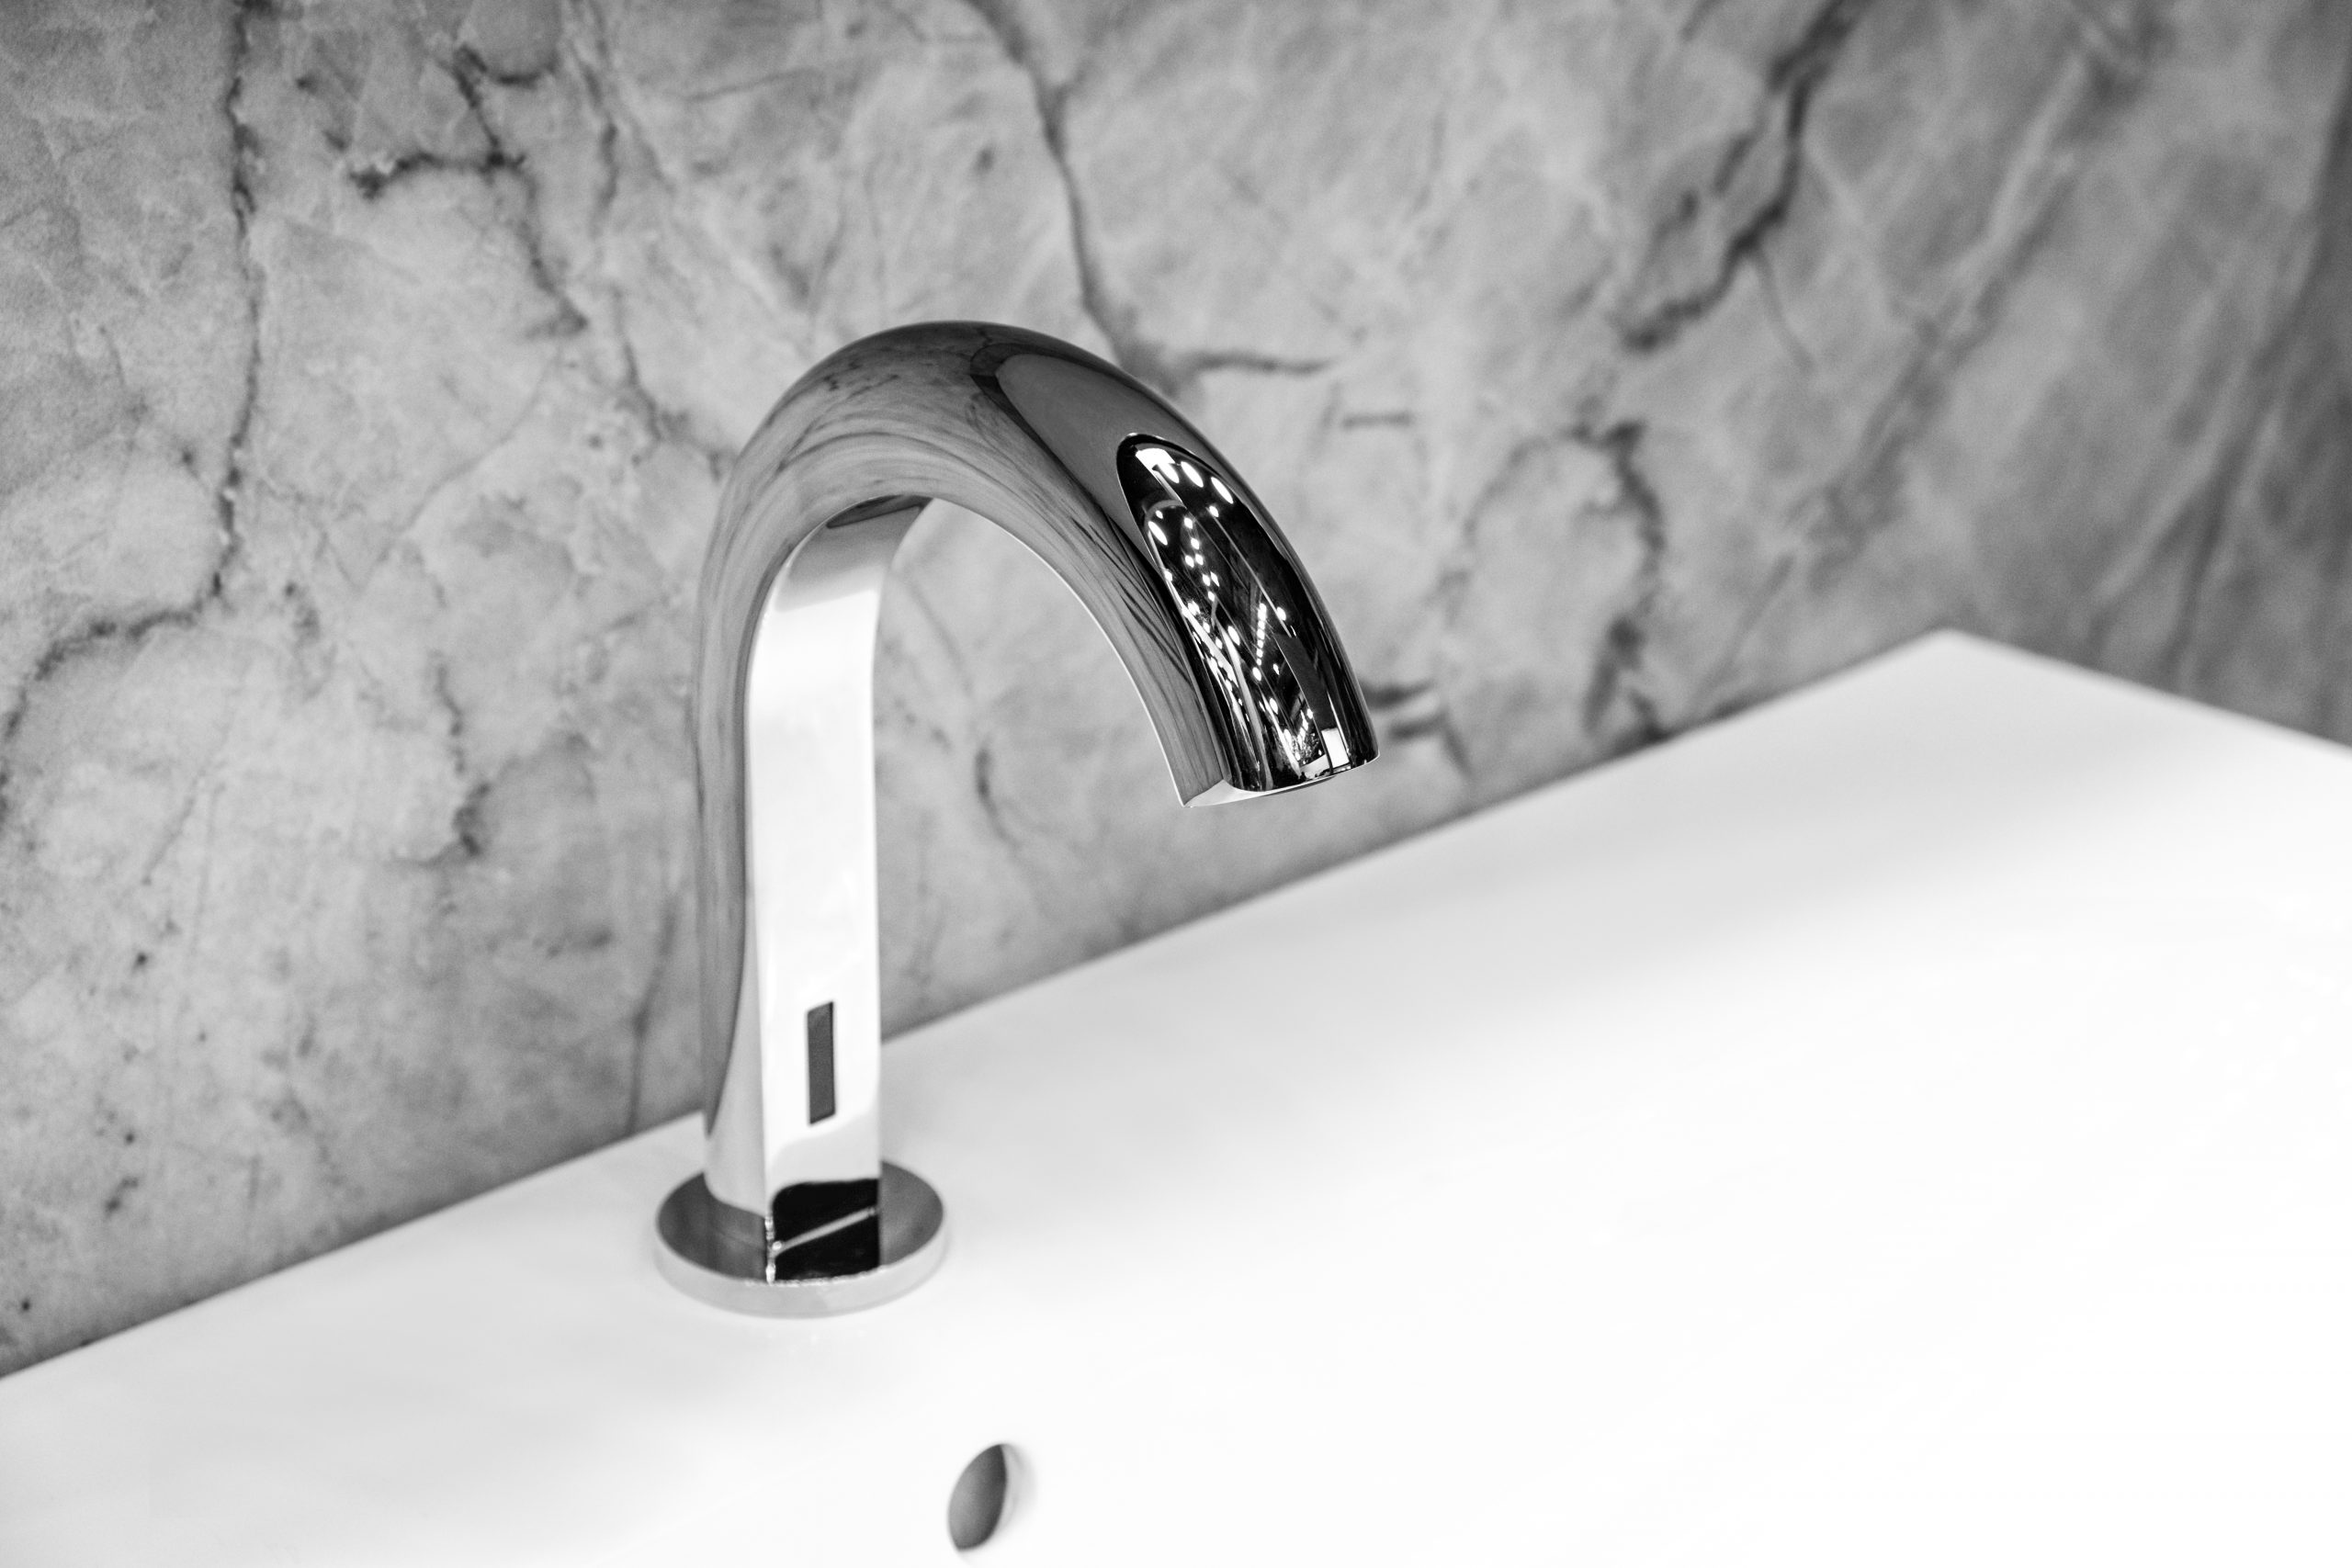  Luxury infrared faucet mixer on a white sink in a beautiful white and gray bathroom